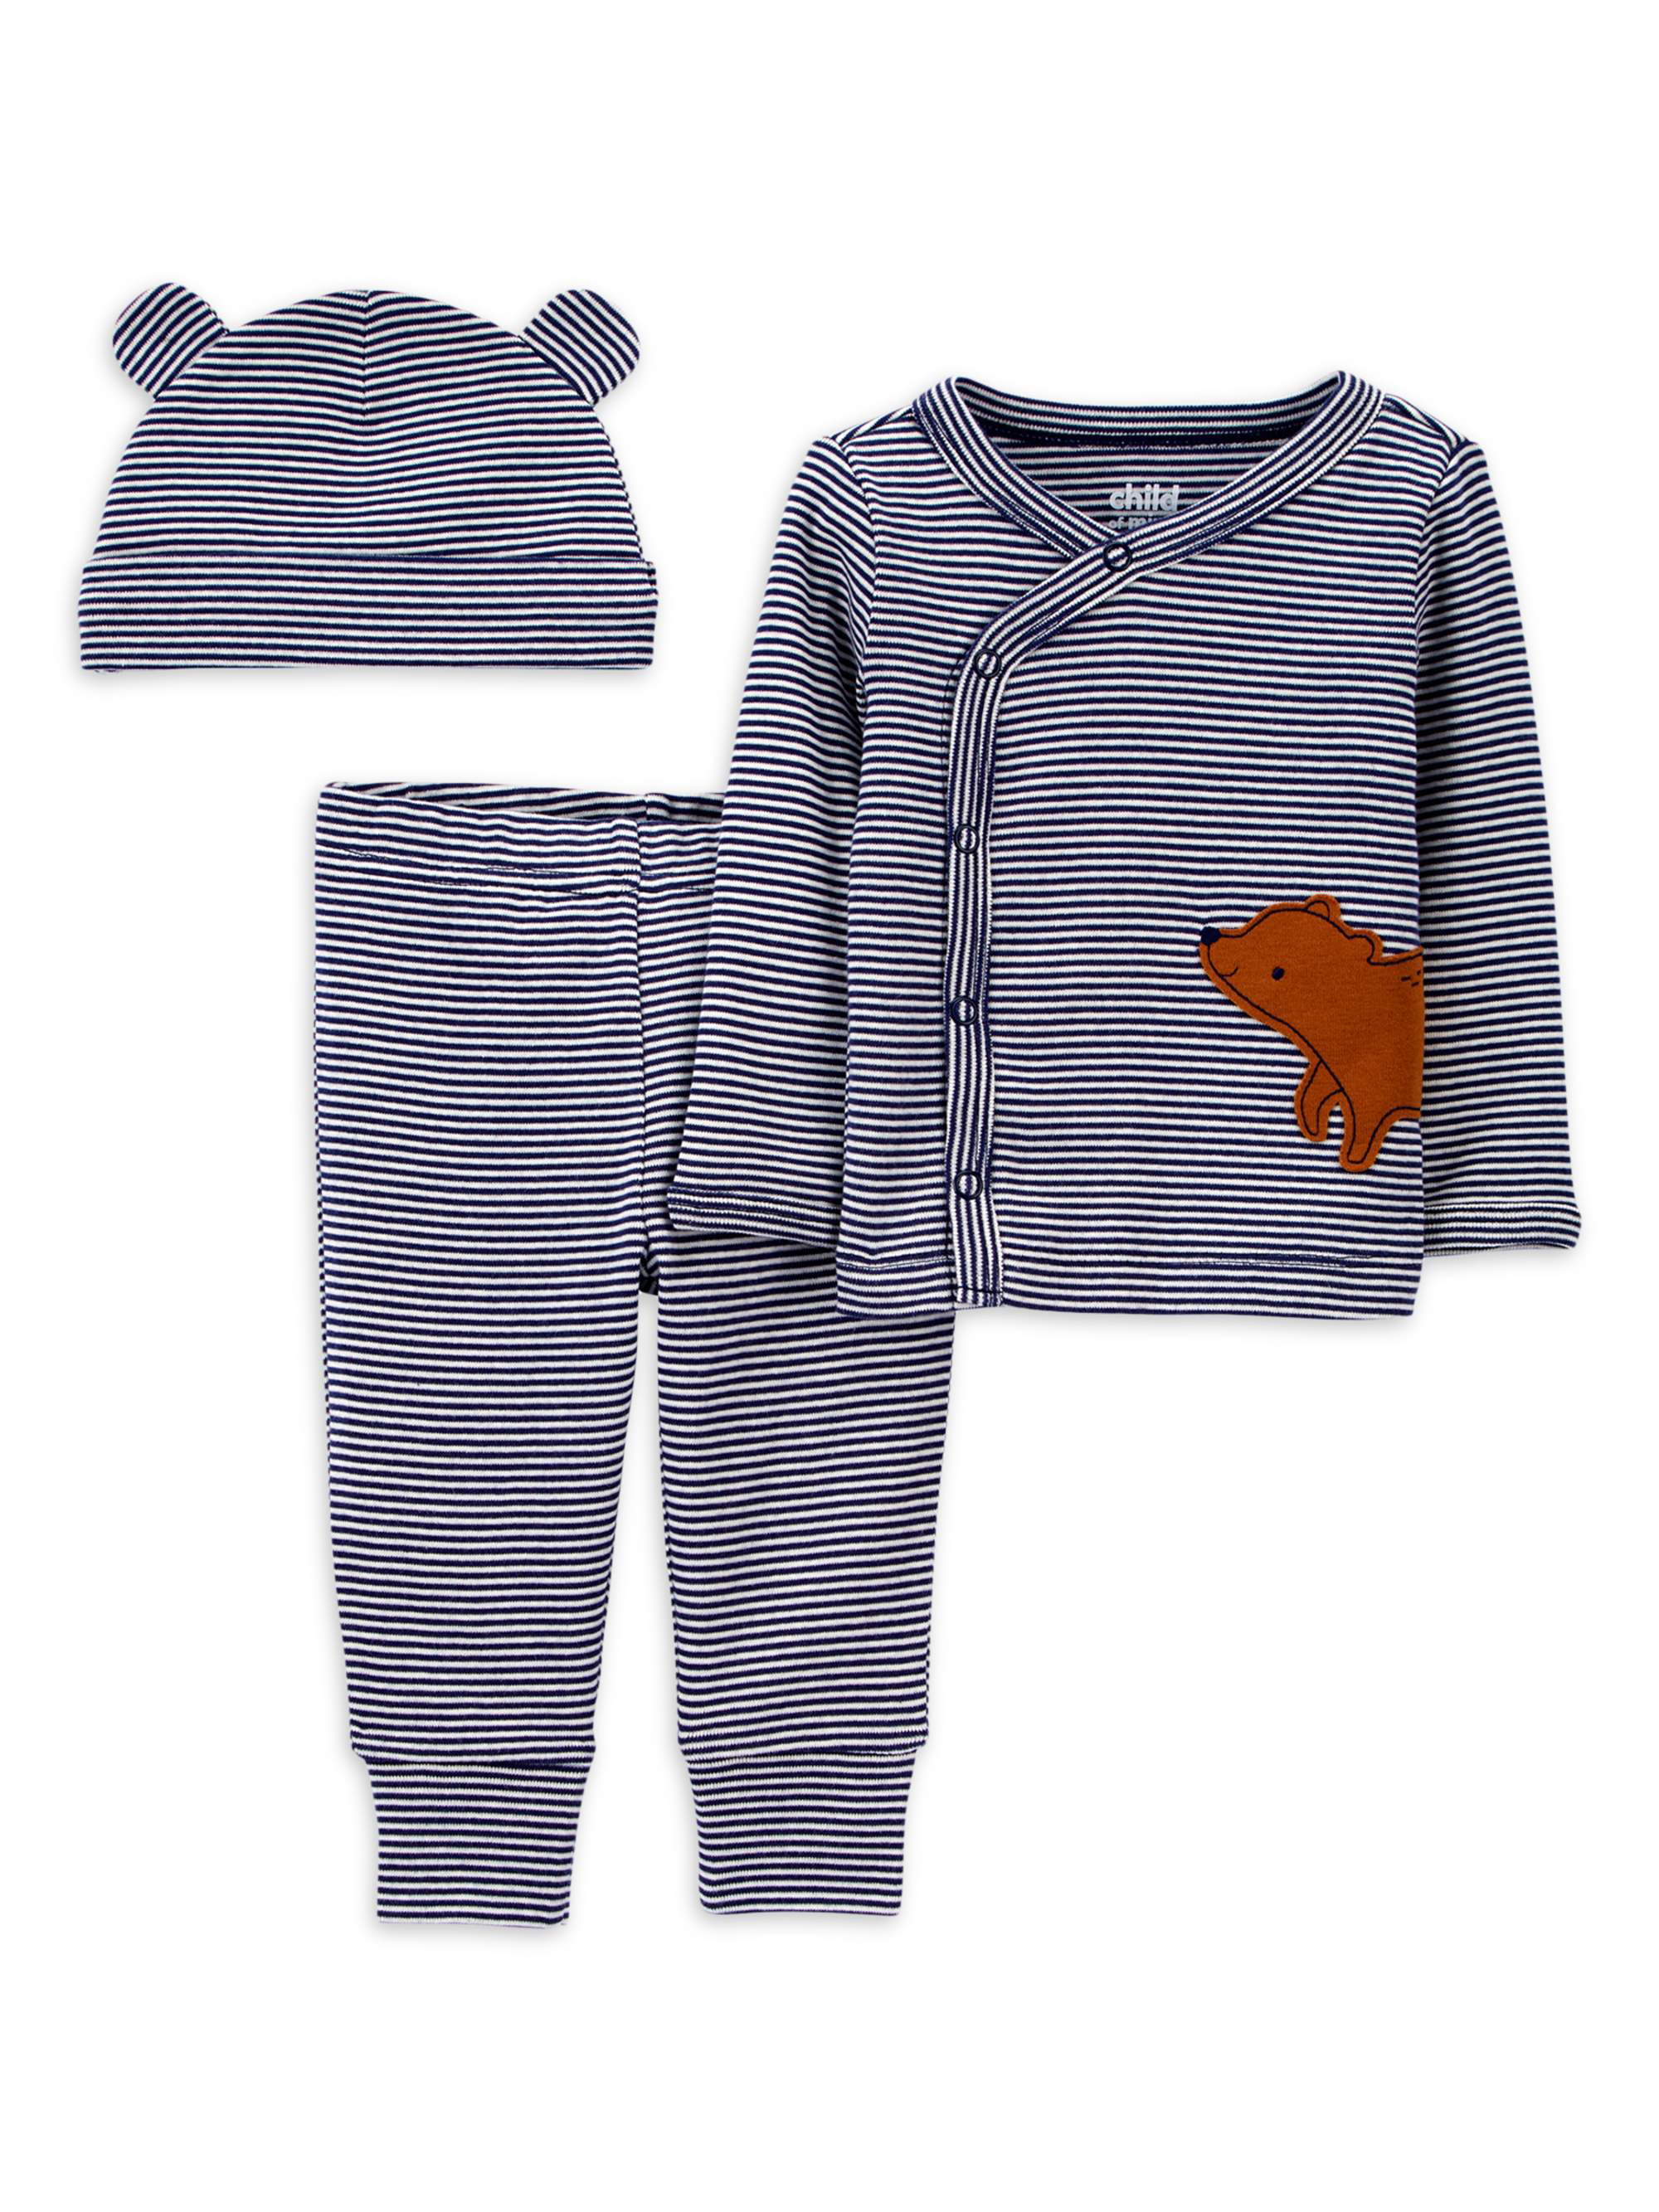 Carter's Baby Boys 3 Pc Bodysuits and Pants Set Choose Size